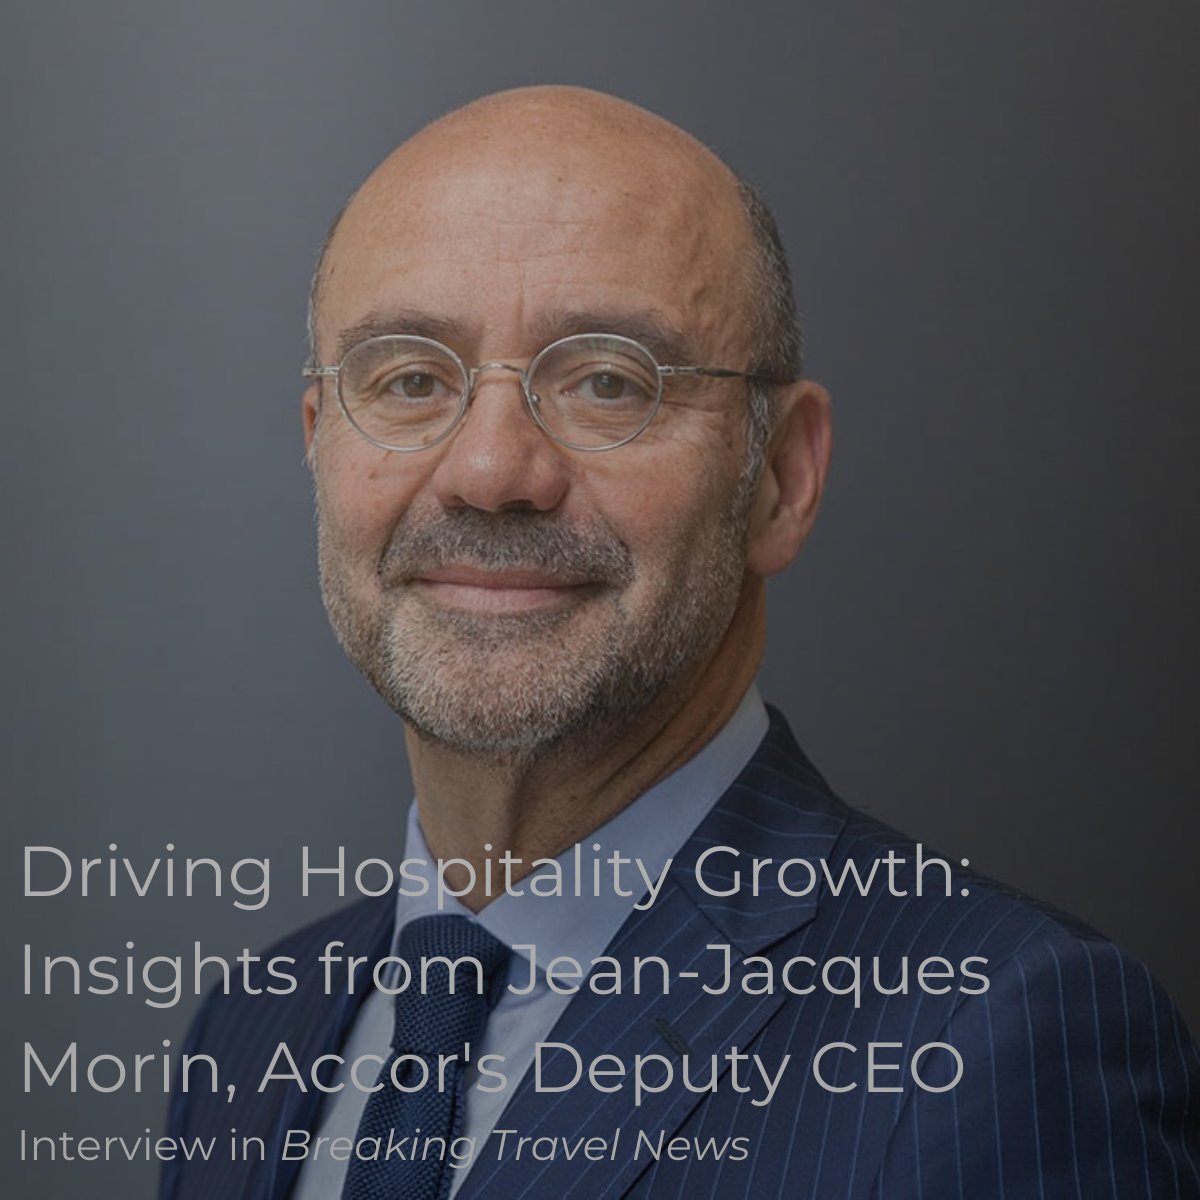 🌟 In this interview with Jean-Jacques Morin, Group Deputy CEO & CEO of Accor's Premium, Midscale & Economy Division, discover insights into Accor's strategic focus on innovation, sustainability, and community impact at the approaching #FHSSaudiArabia bit.ly/49EqkXu